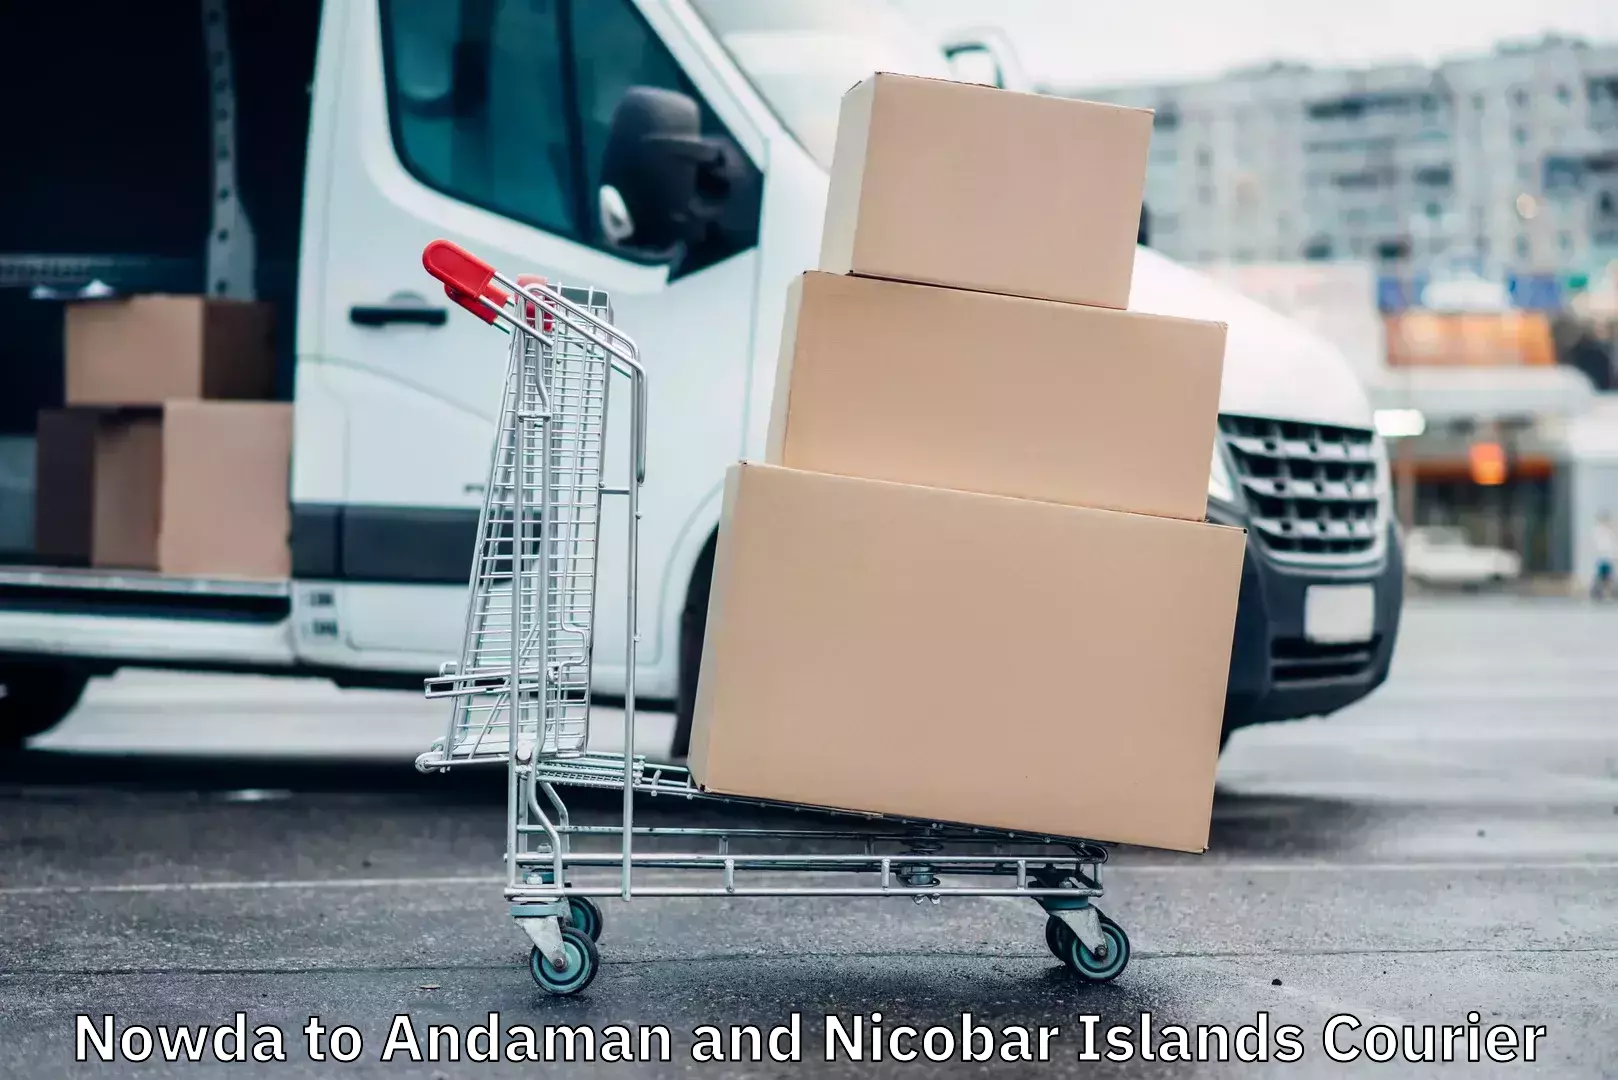 Courier service booking in Nowda to Andaman and Nicobar Islands